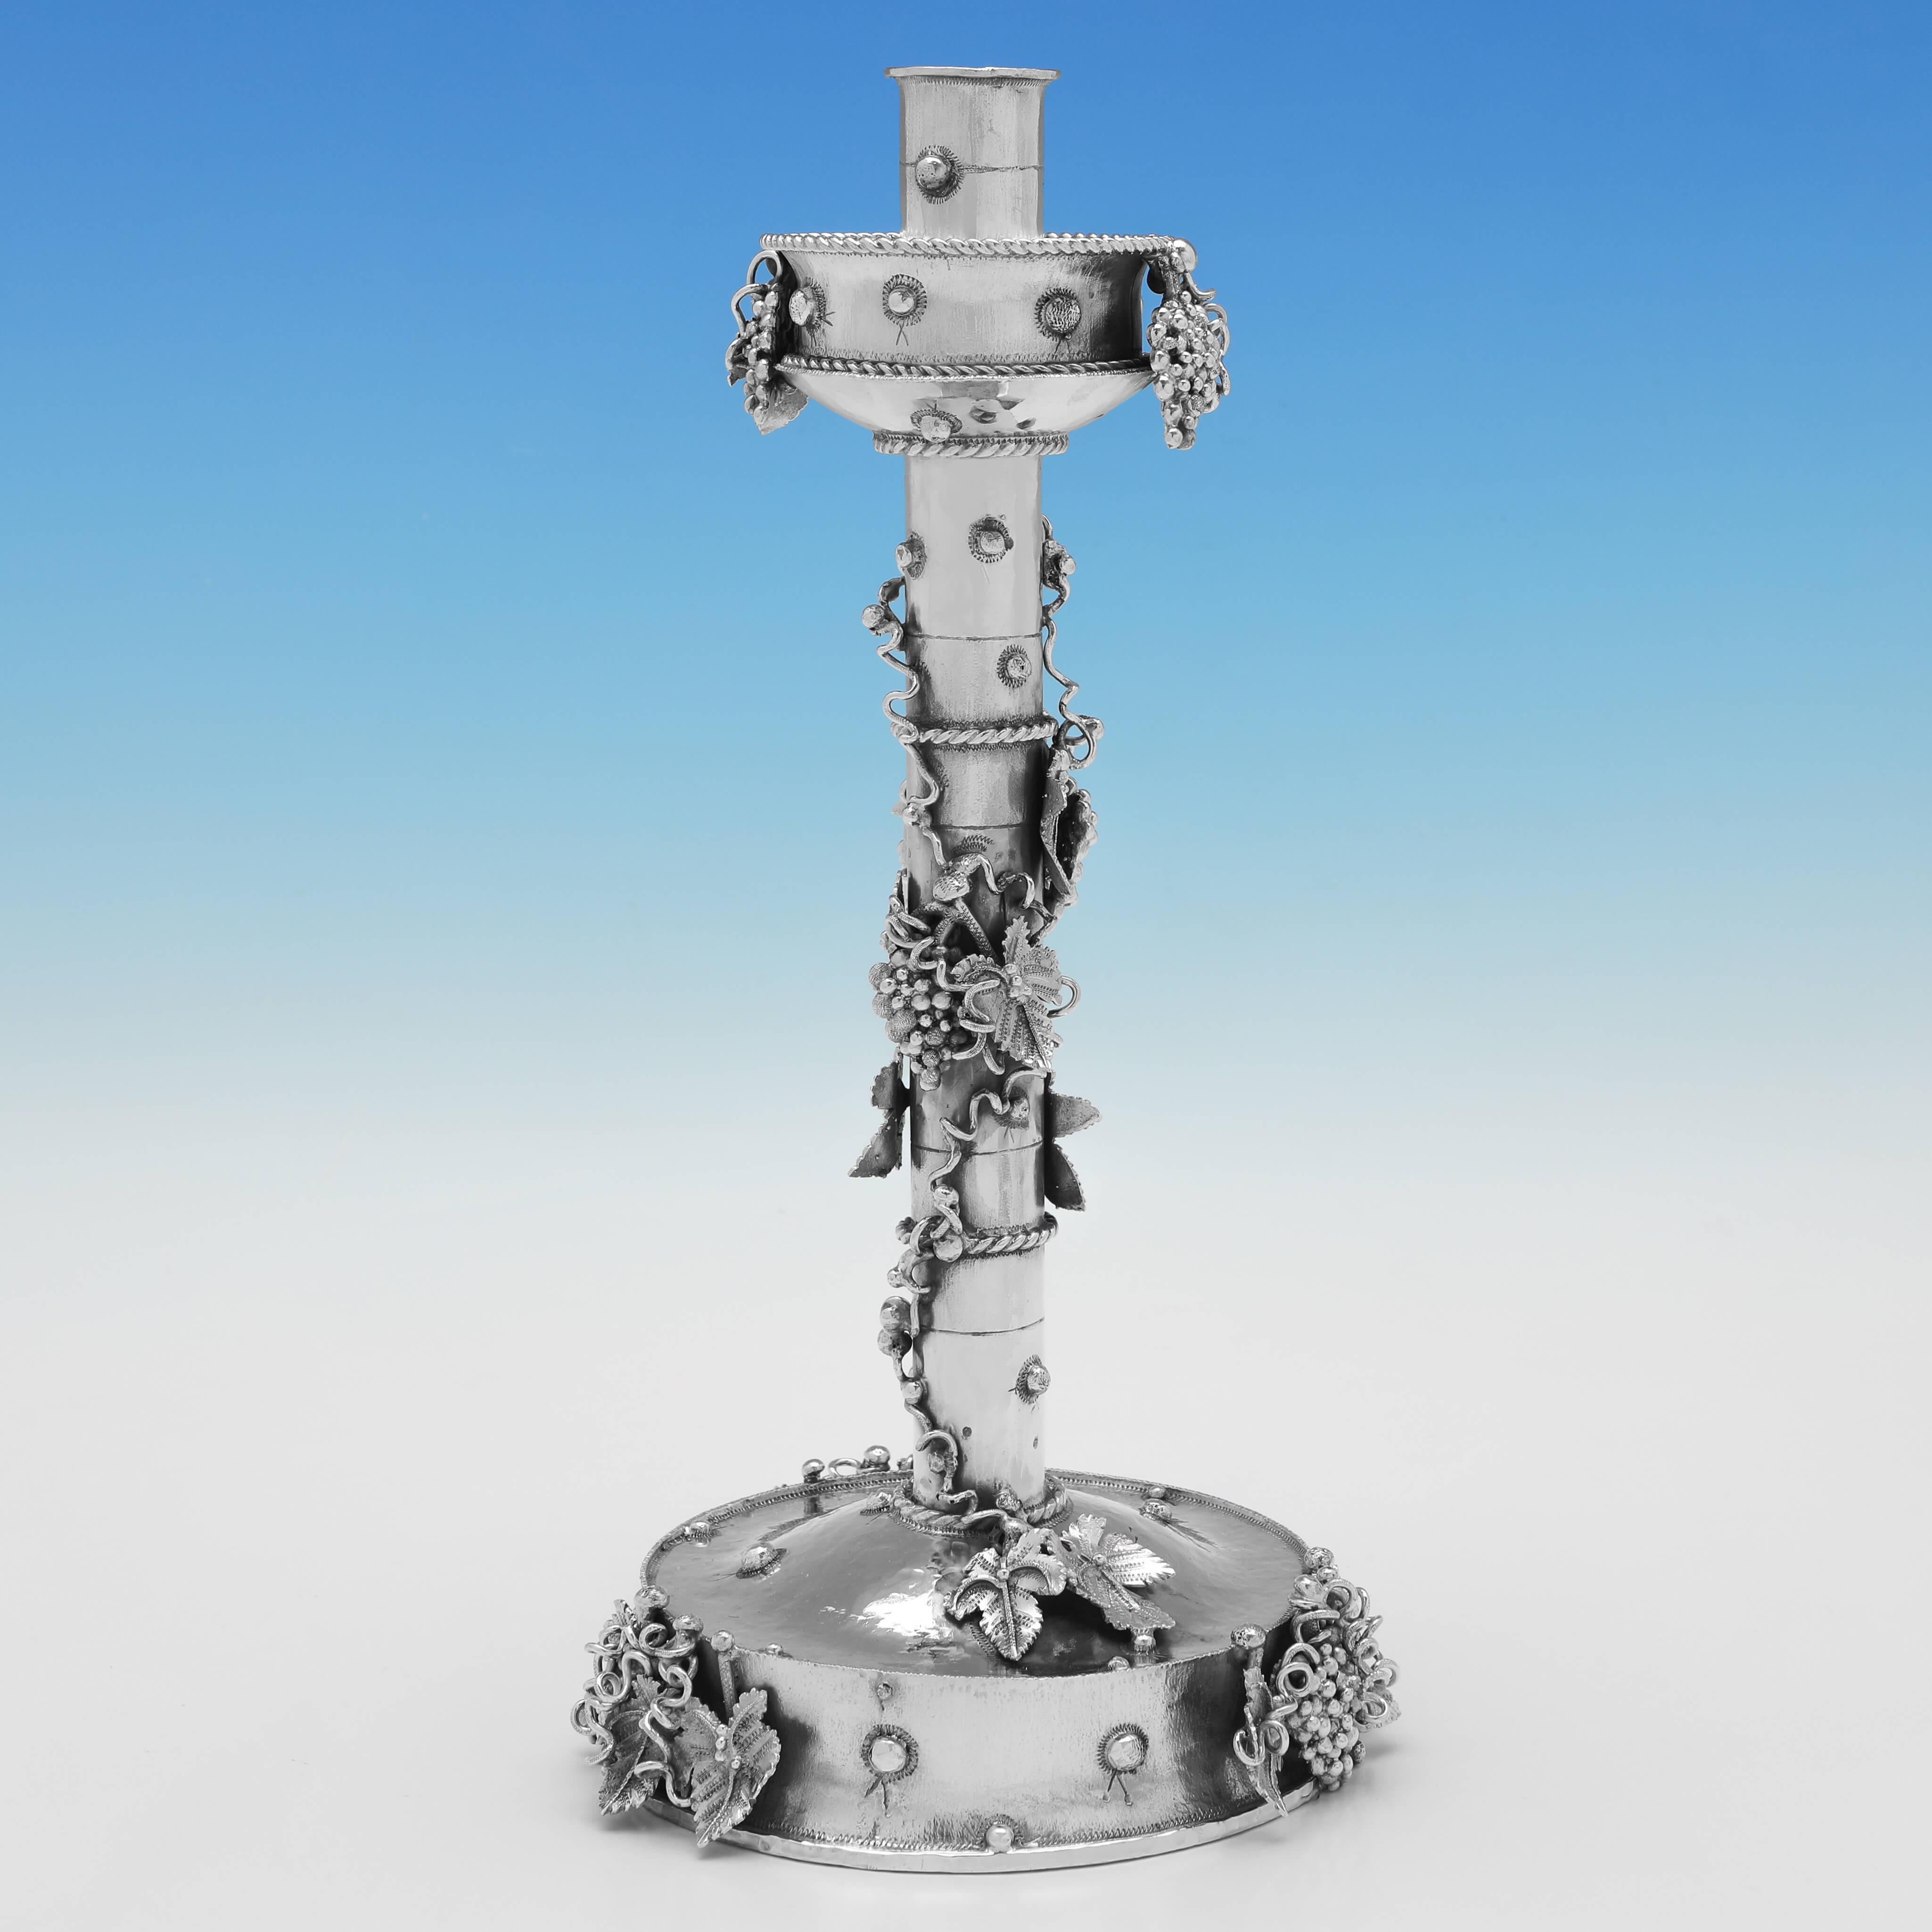 Hallmarked in London in 1996 by Michael Allen Bolton, this incredible pair of Sterling Silver Candlesticks, are in the Gothic Revival Style Michael was known for, and are wonderfully designed to look like vines have grown up the candlesticks. 

Each